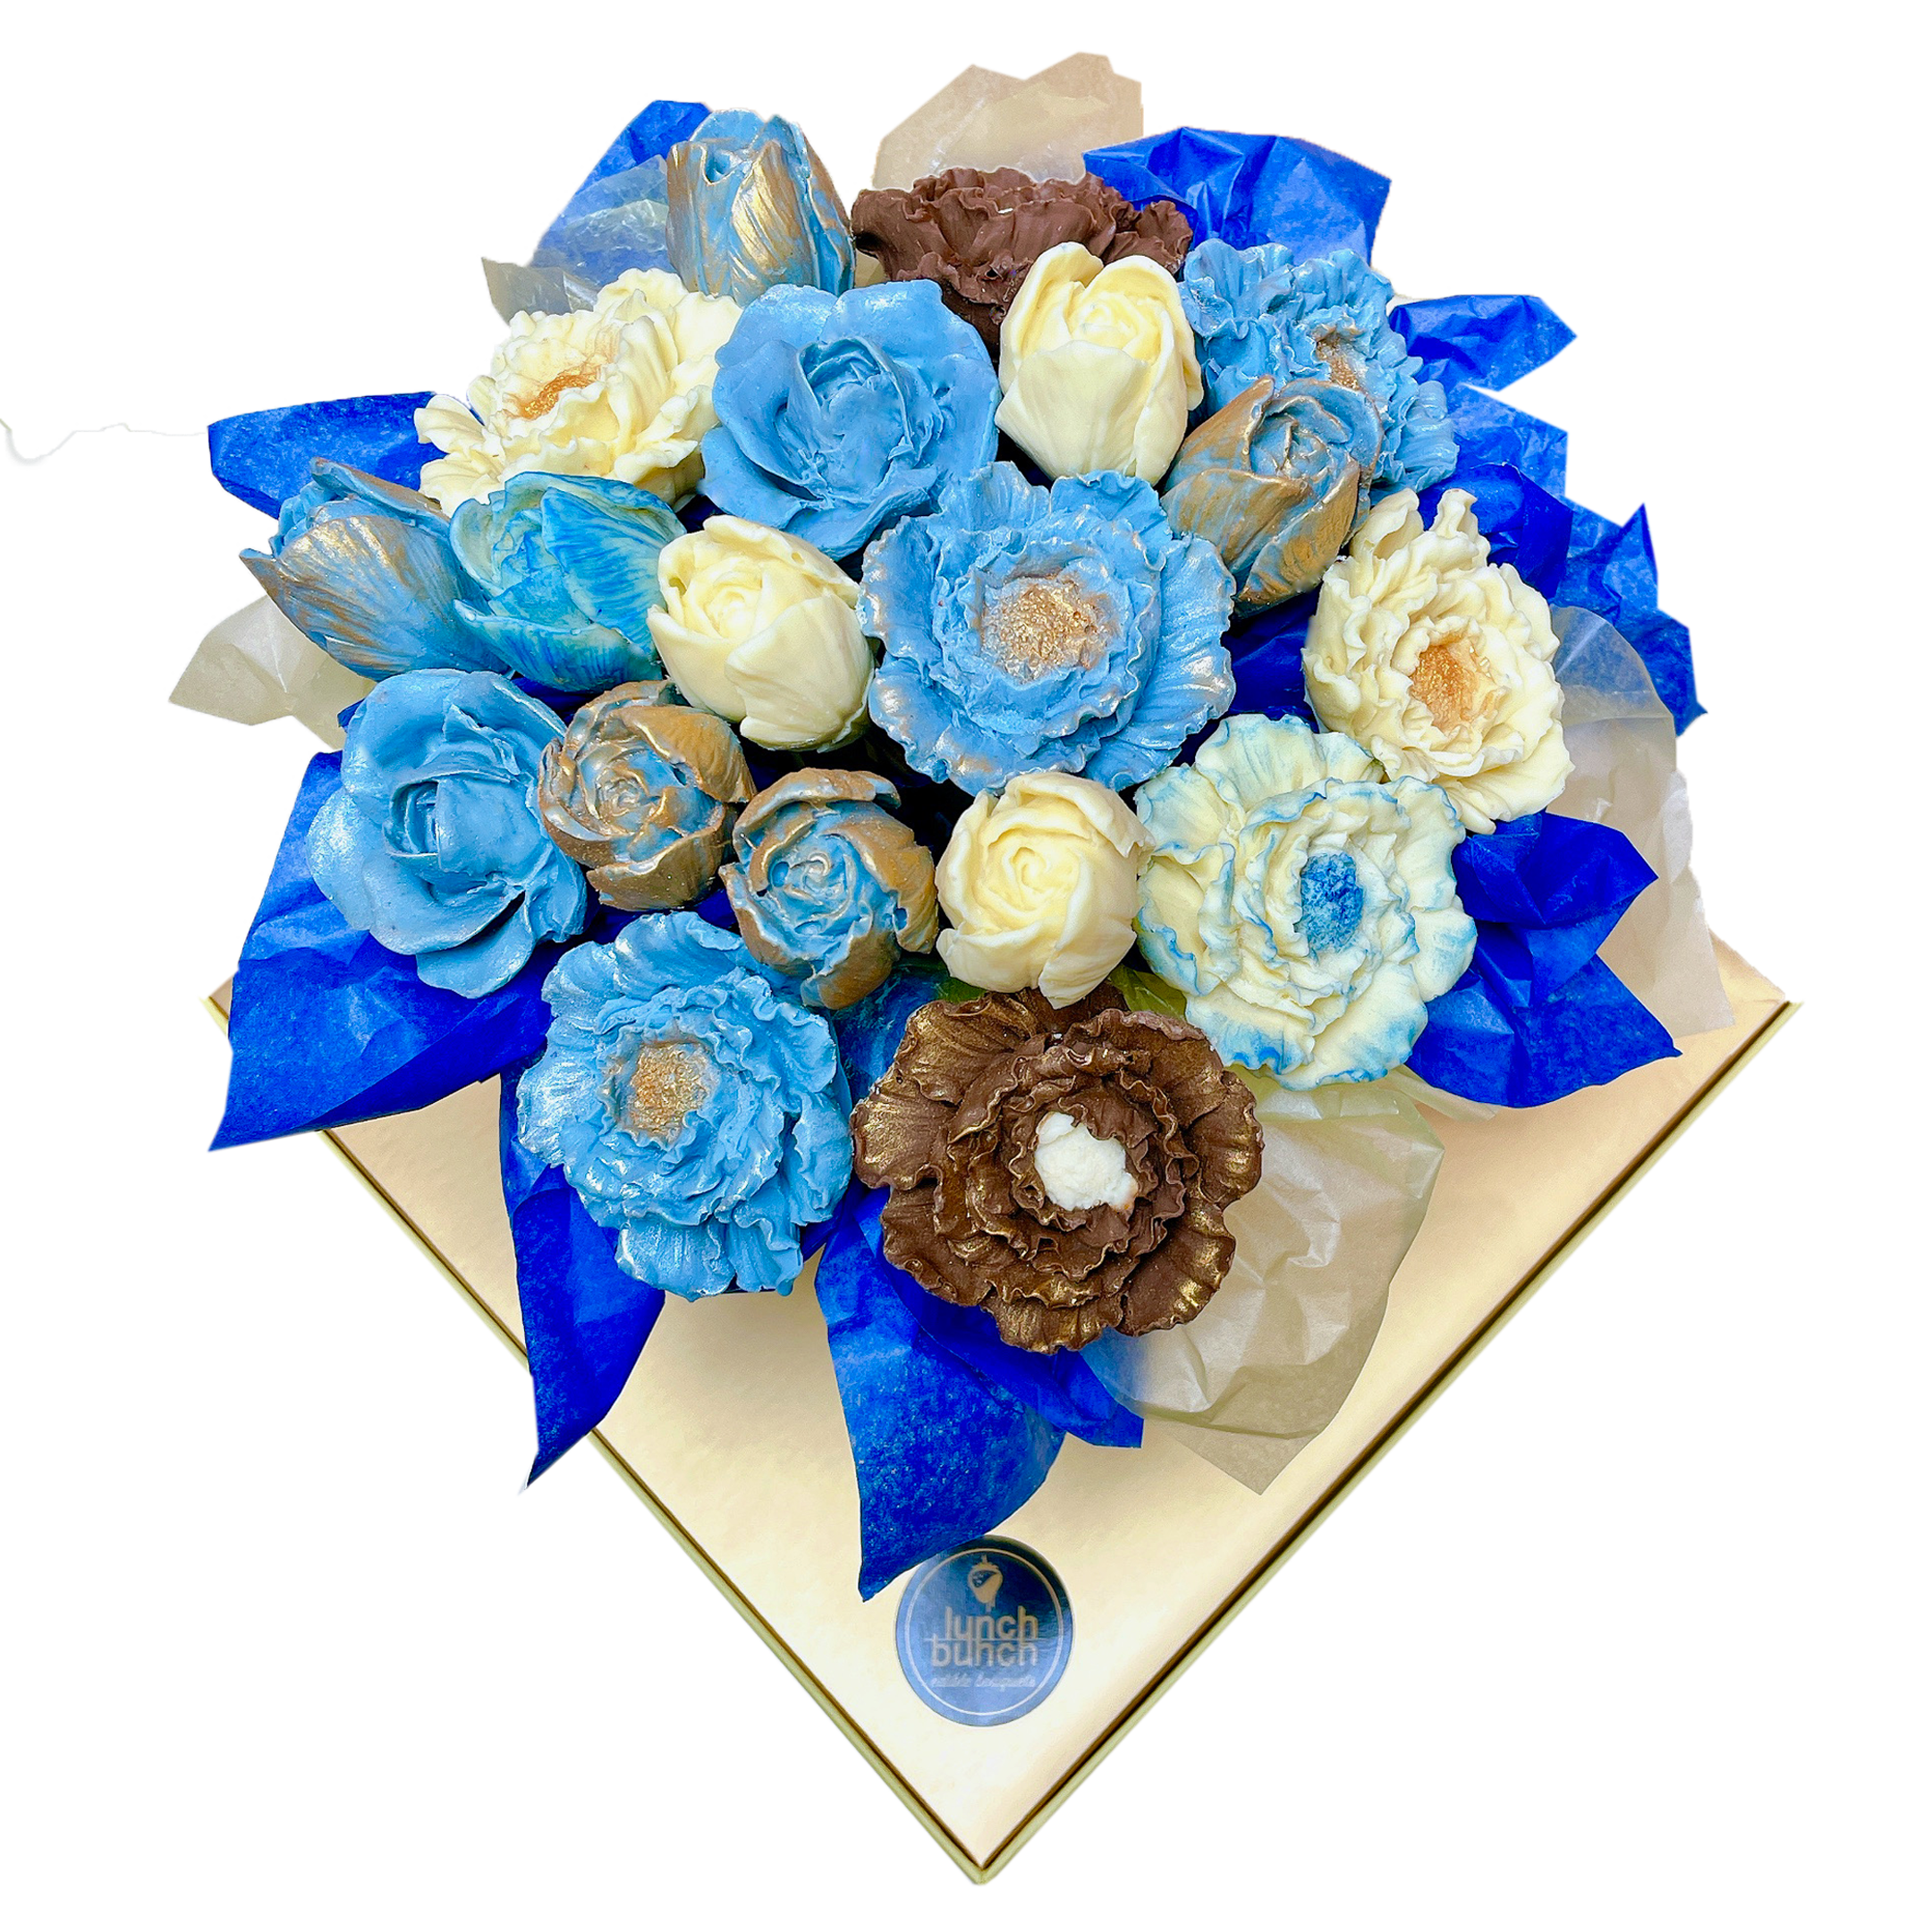 Baby Boy Blue Chocolate flowers, 3D chocolate flowers, gift for him, baby shower gift